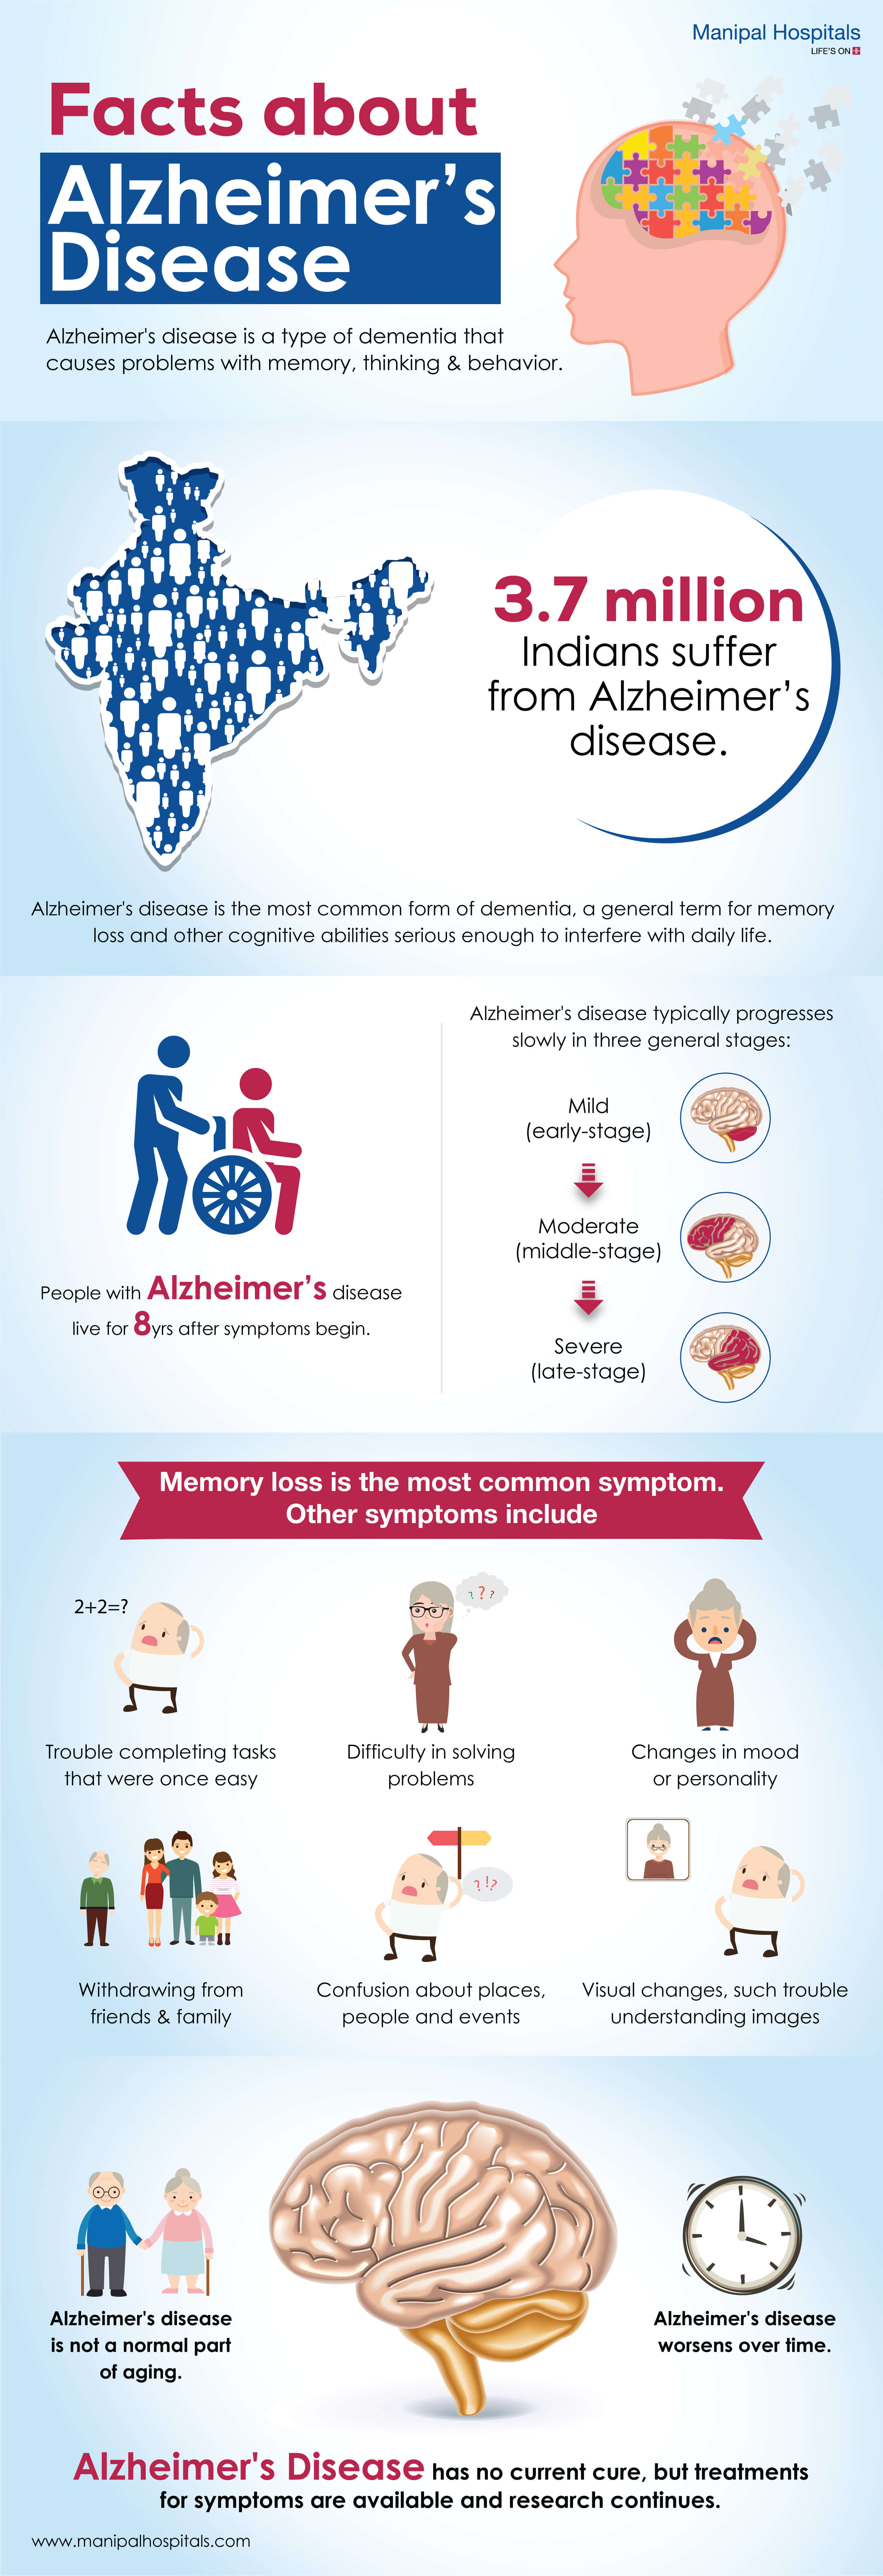 About Alzheimer's Disease [INFOGRAPHIC] Infographic Plaza